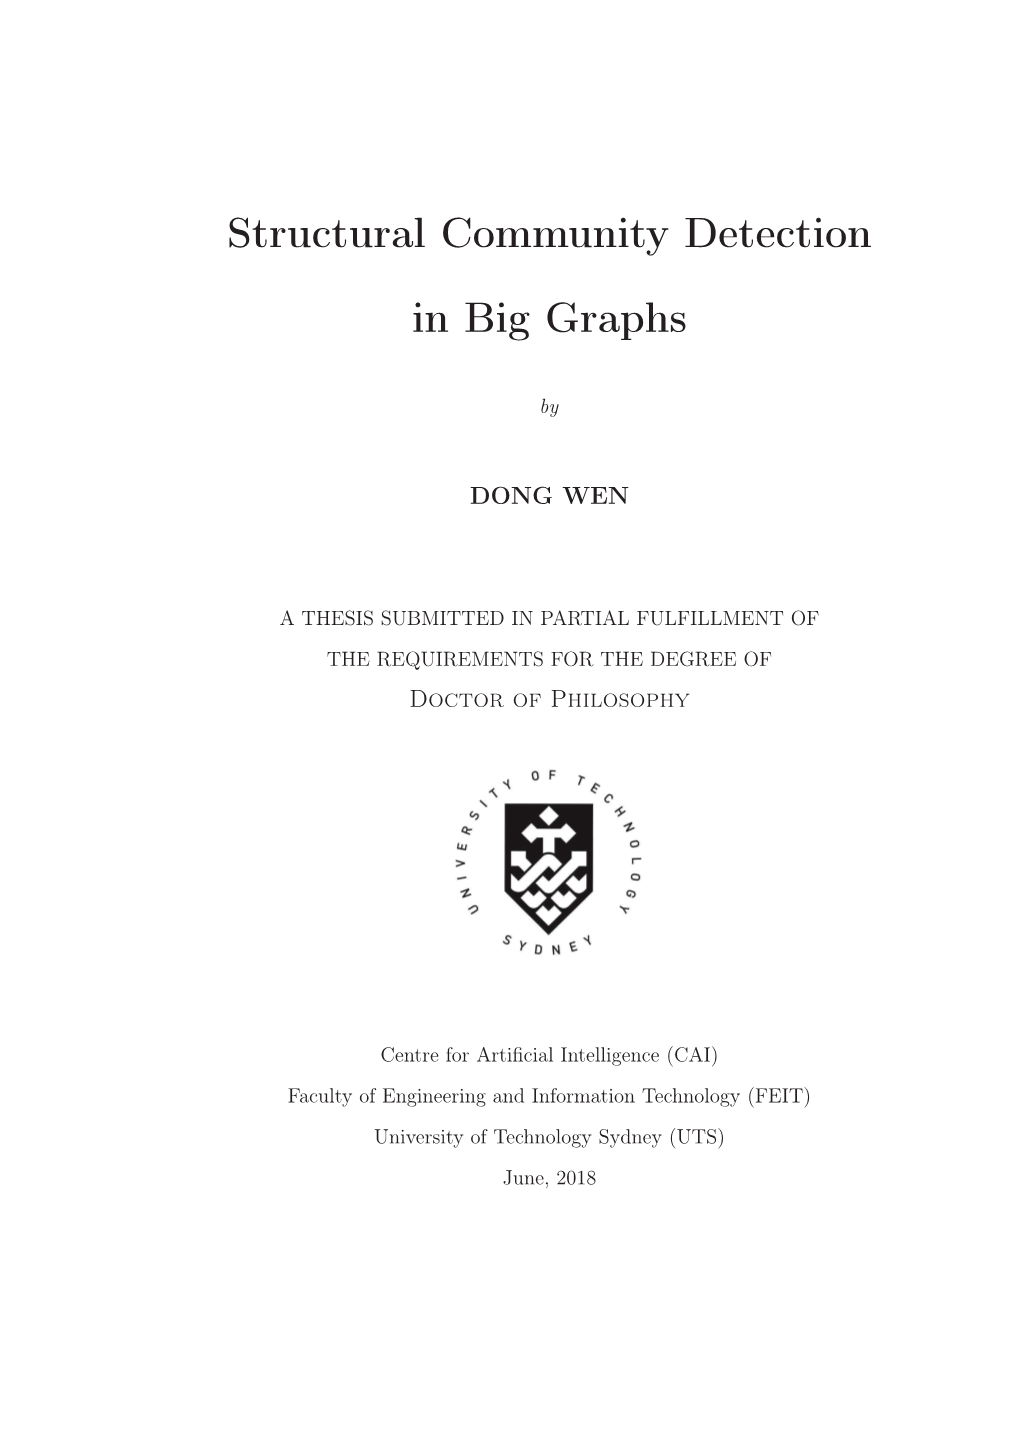 Structural Community Detection in Big Graphs